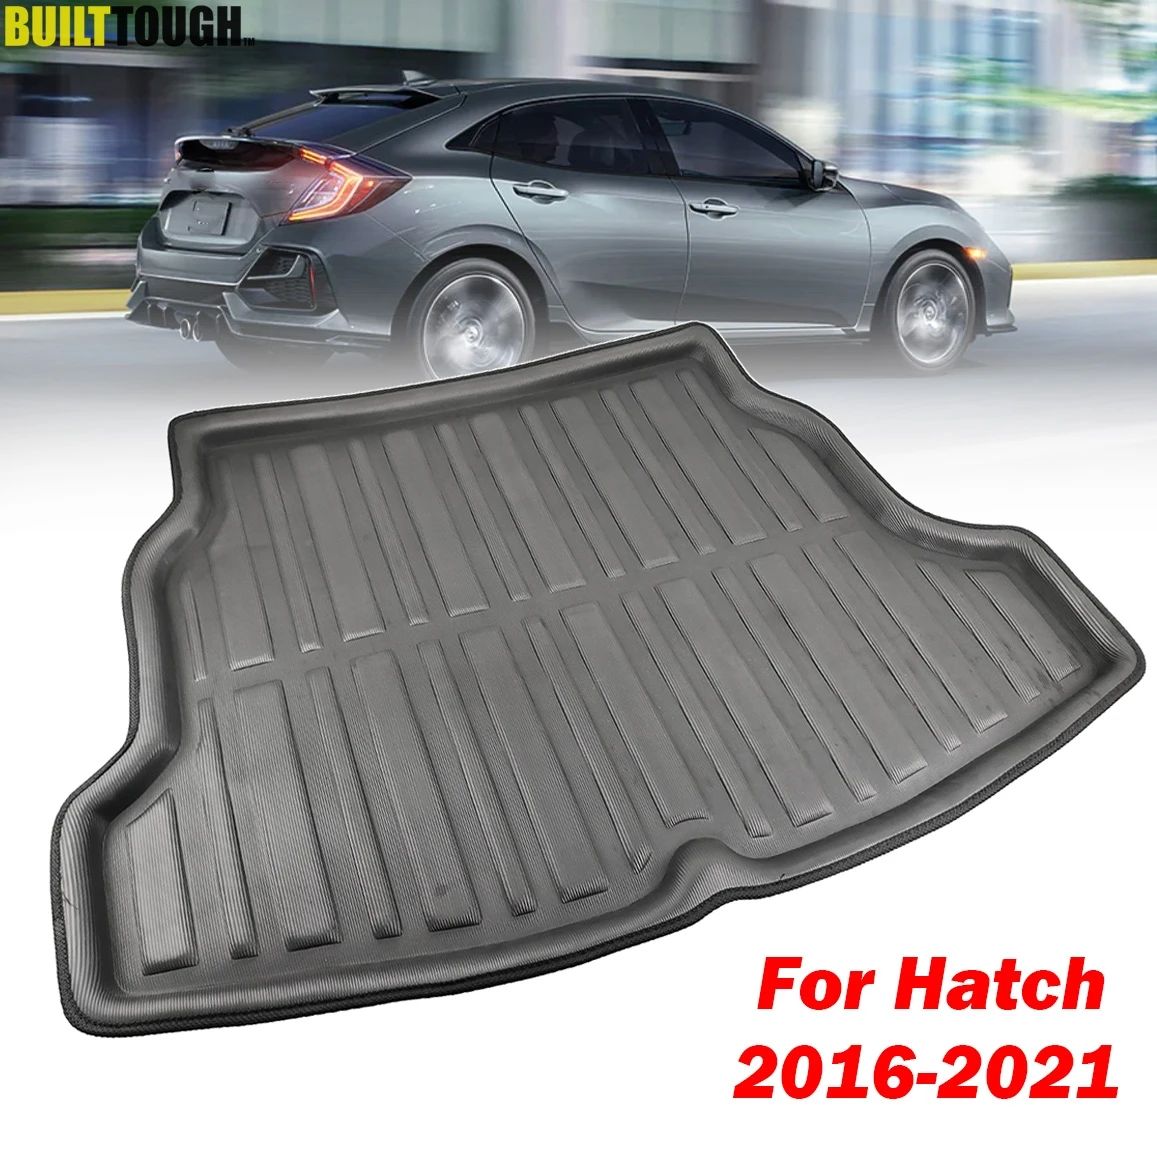 Tailored For Honda Civic 5dr Hatch 2017-2021 Boot Cargo Liner Trunk Luggage Tray Carpet 2018 2019 2020